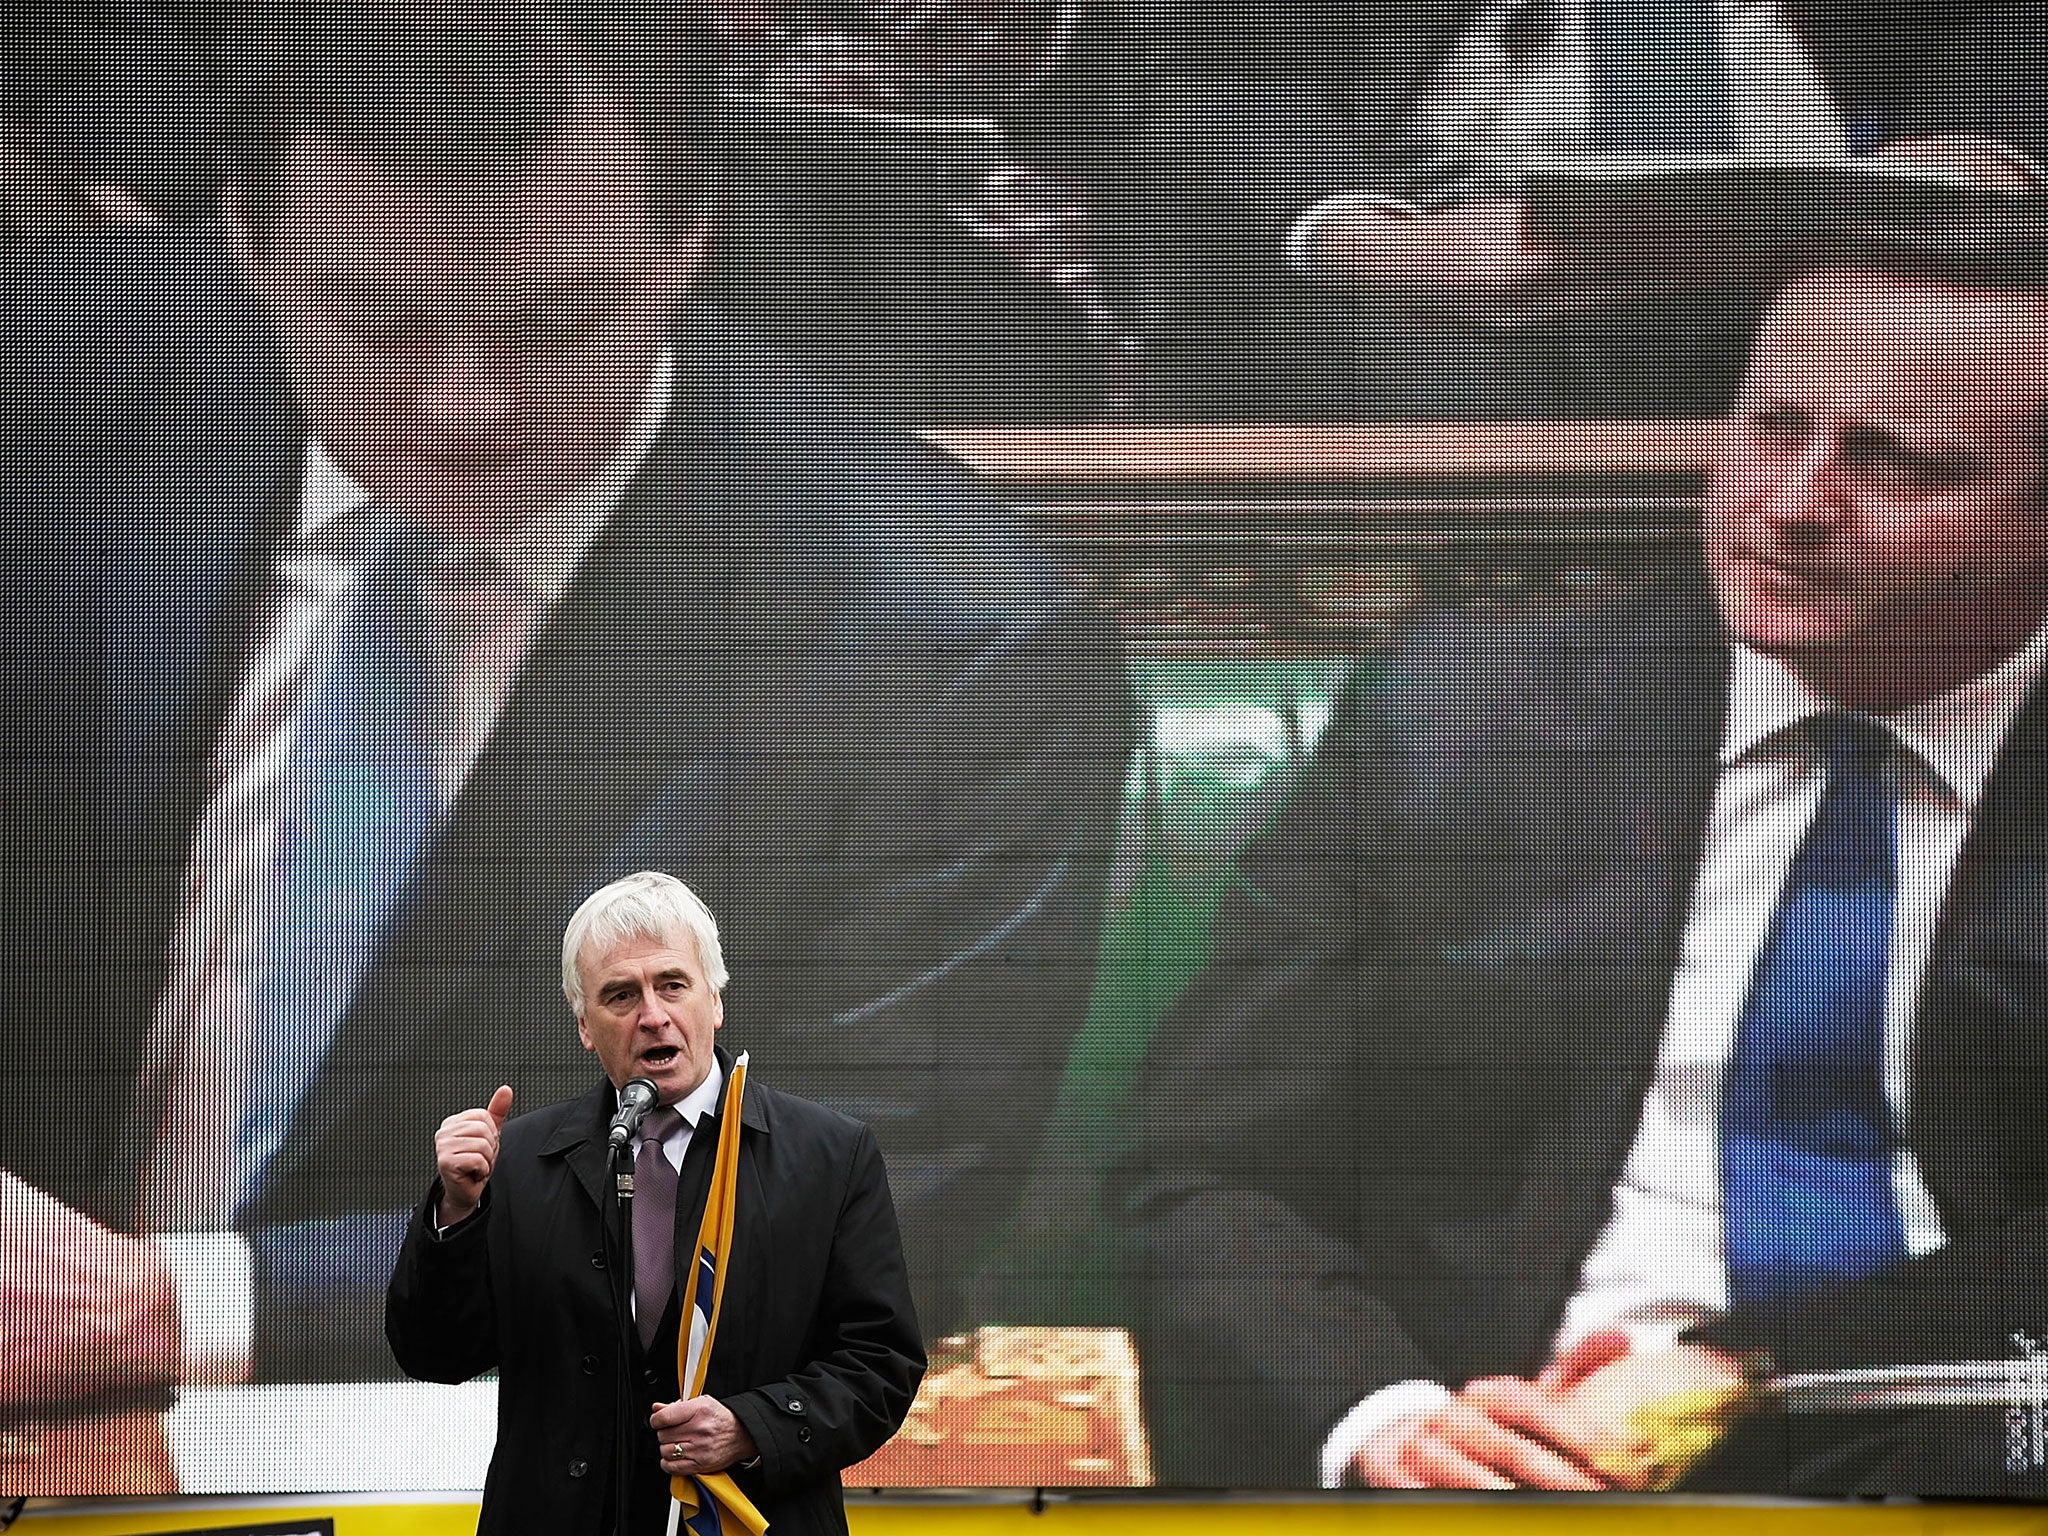 John McDonnell has said that Labour will back George Osborne's fiscal policy